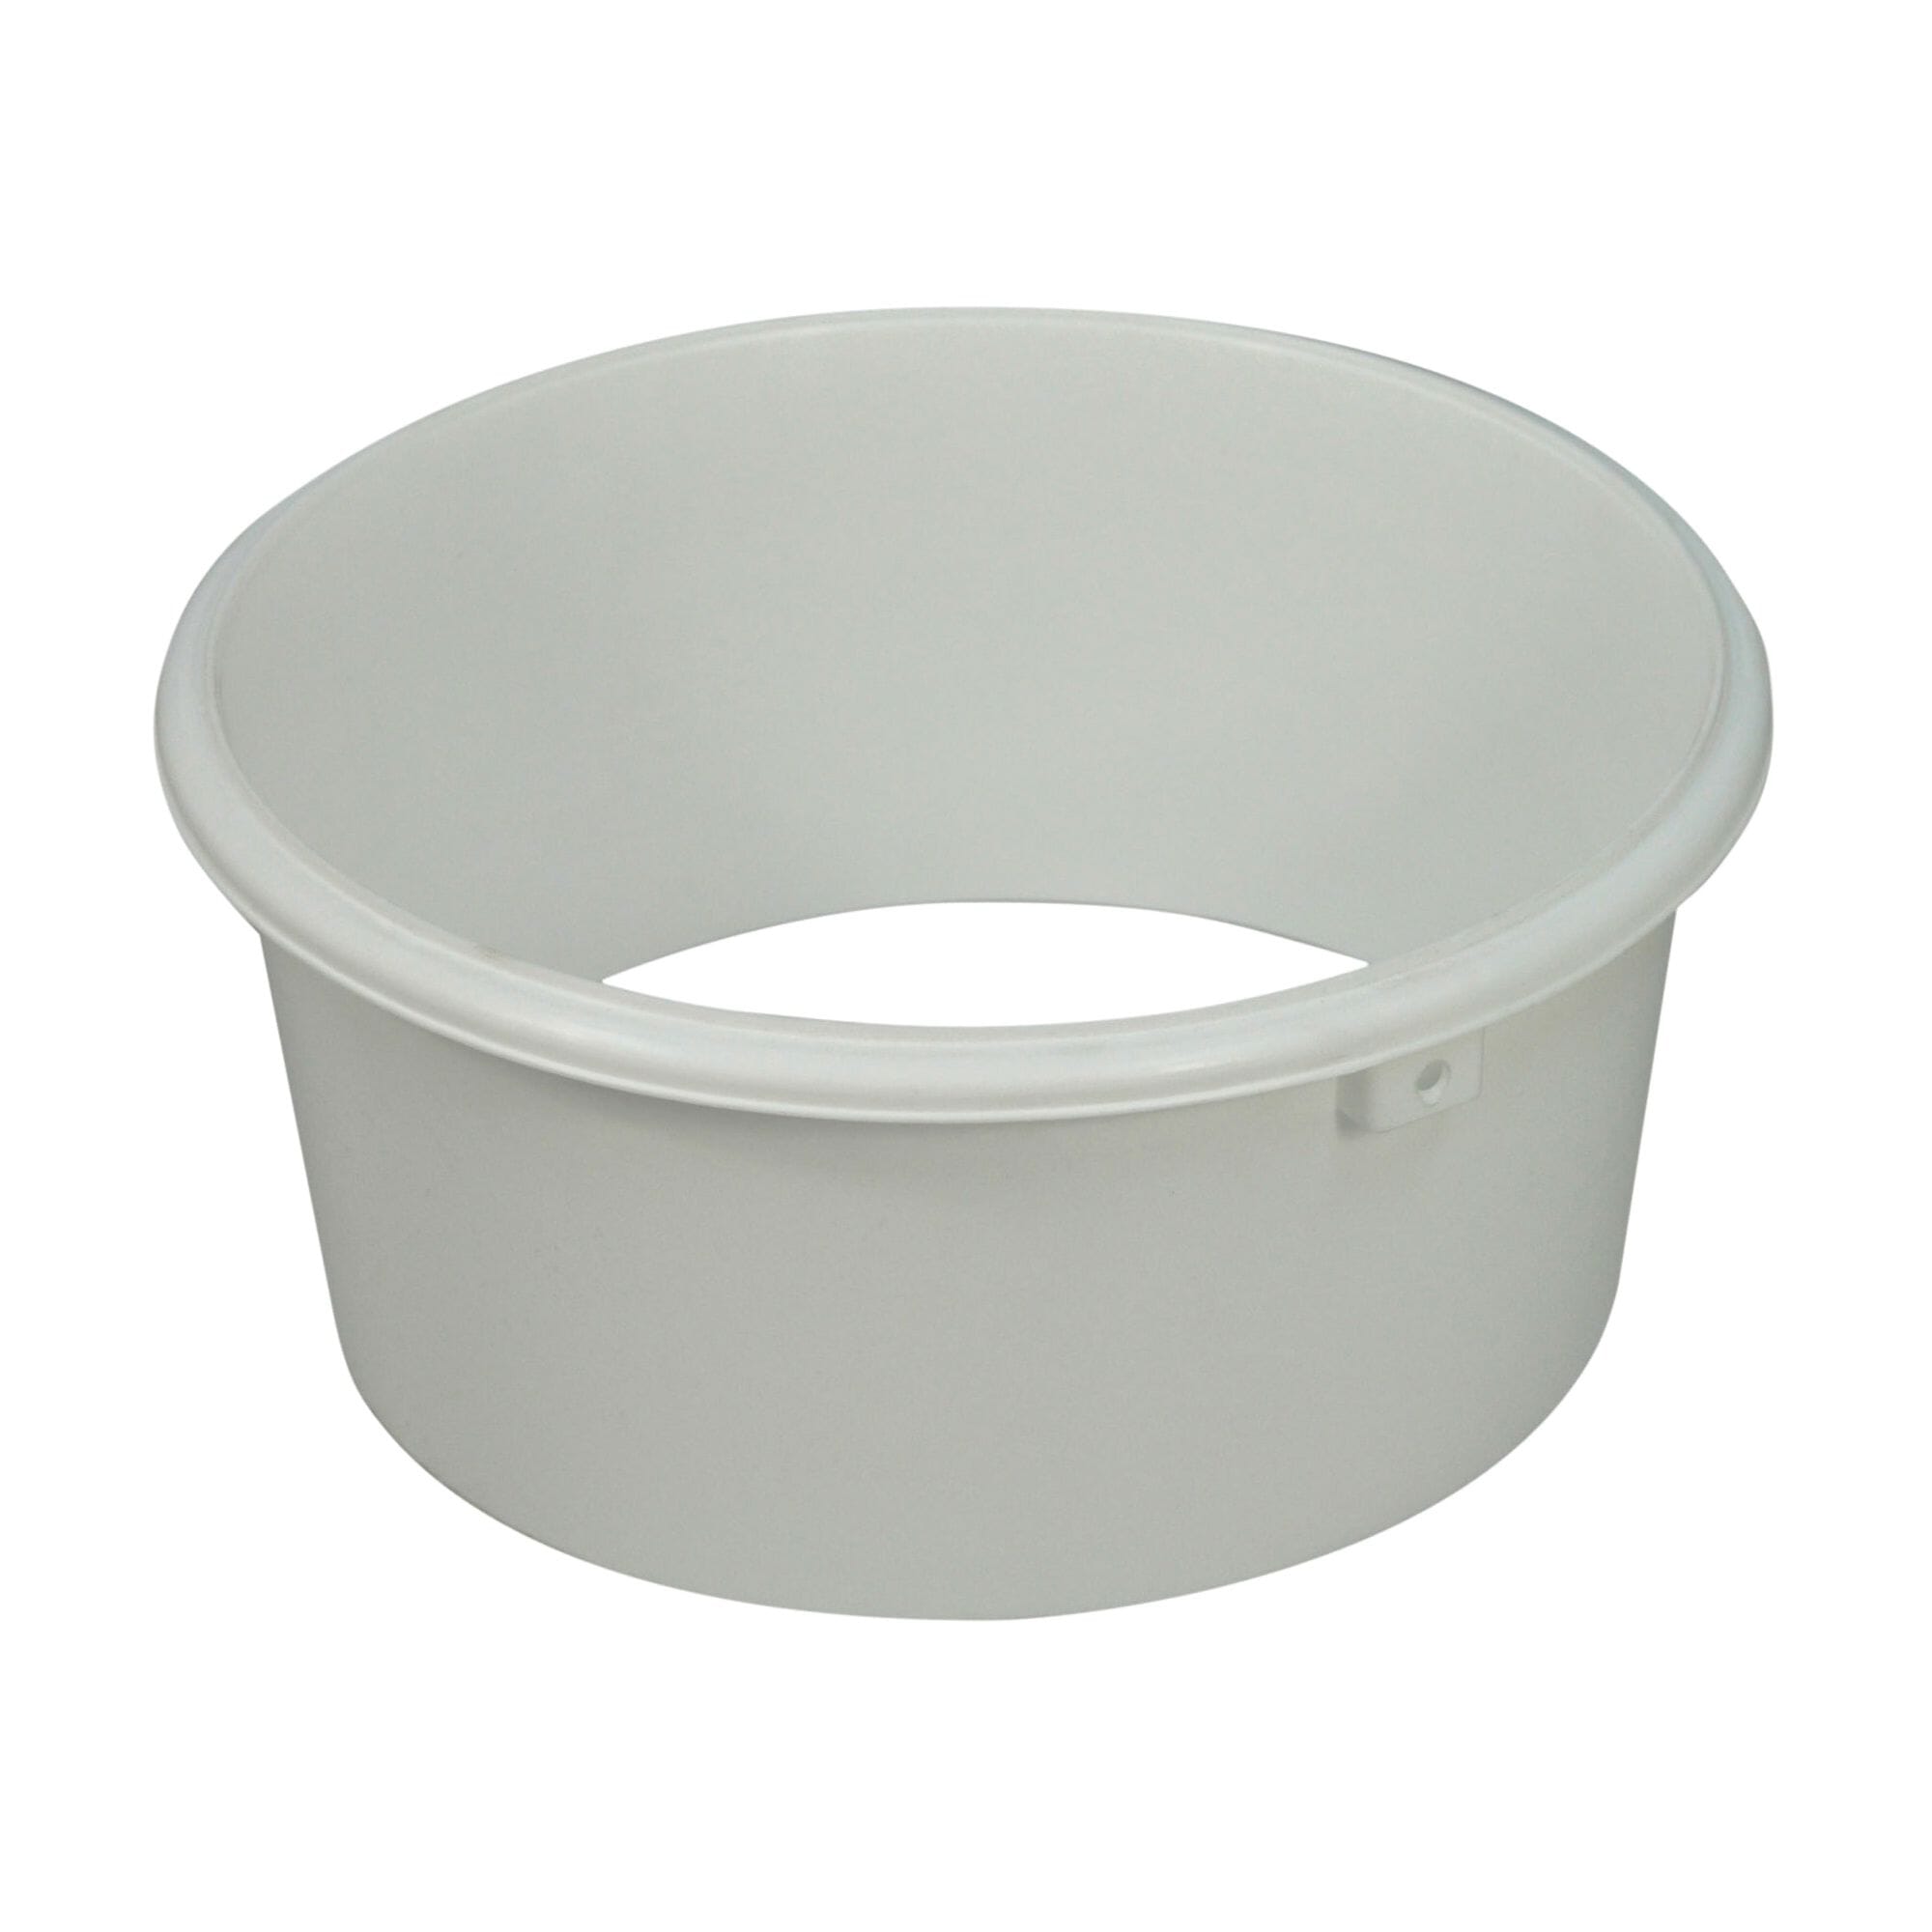 View Replacement Sleeve for the Solo Skandia Toilet Seat information